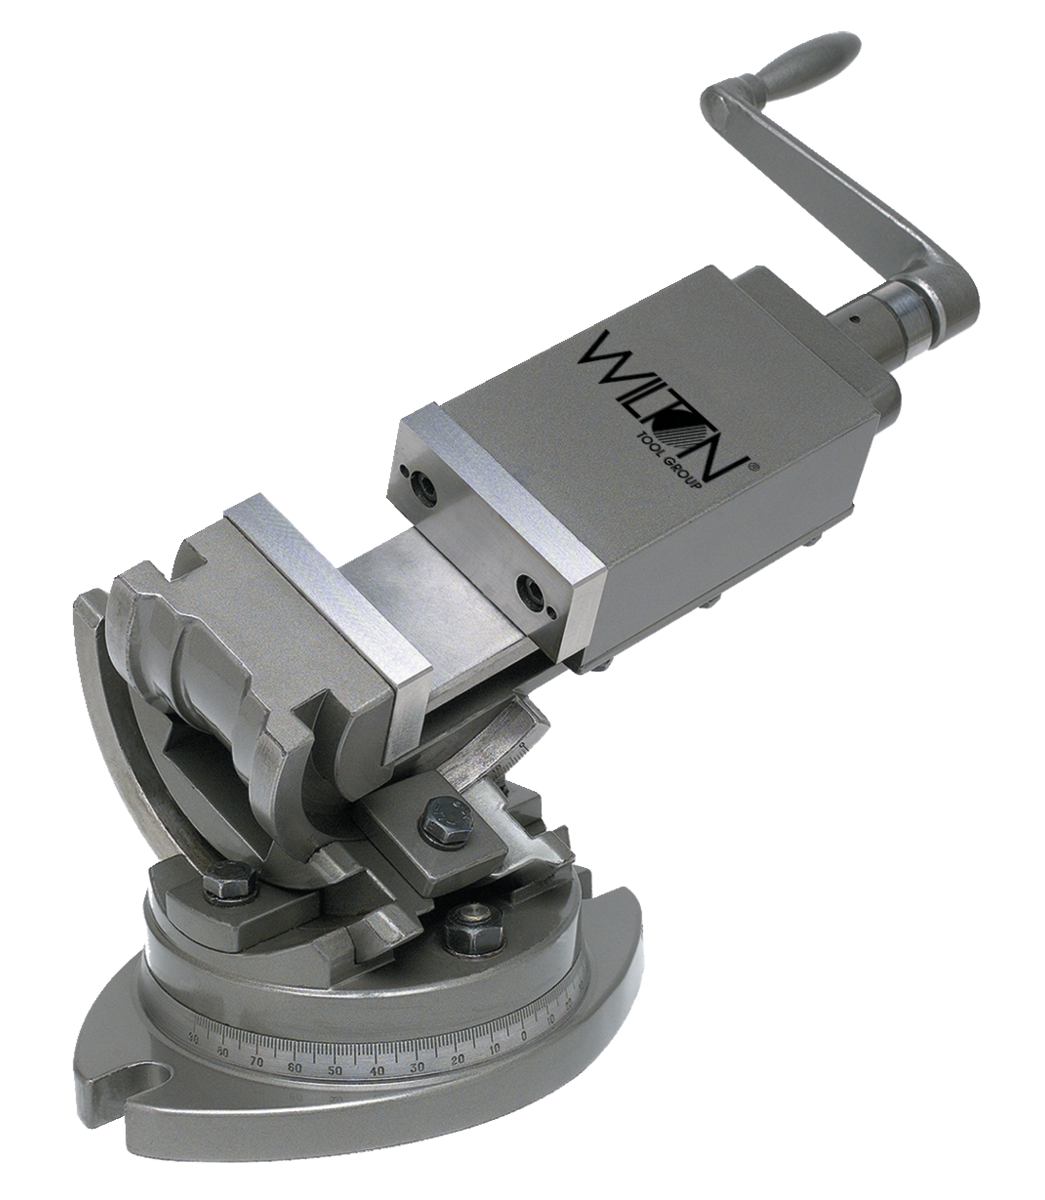 TLT/SP-100, 3-Axis Precision Tilting Vise 4" Jaw Width, 1-1/2” Jaw Depth